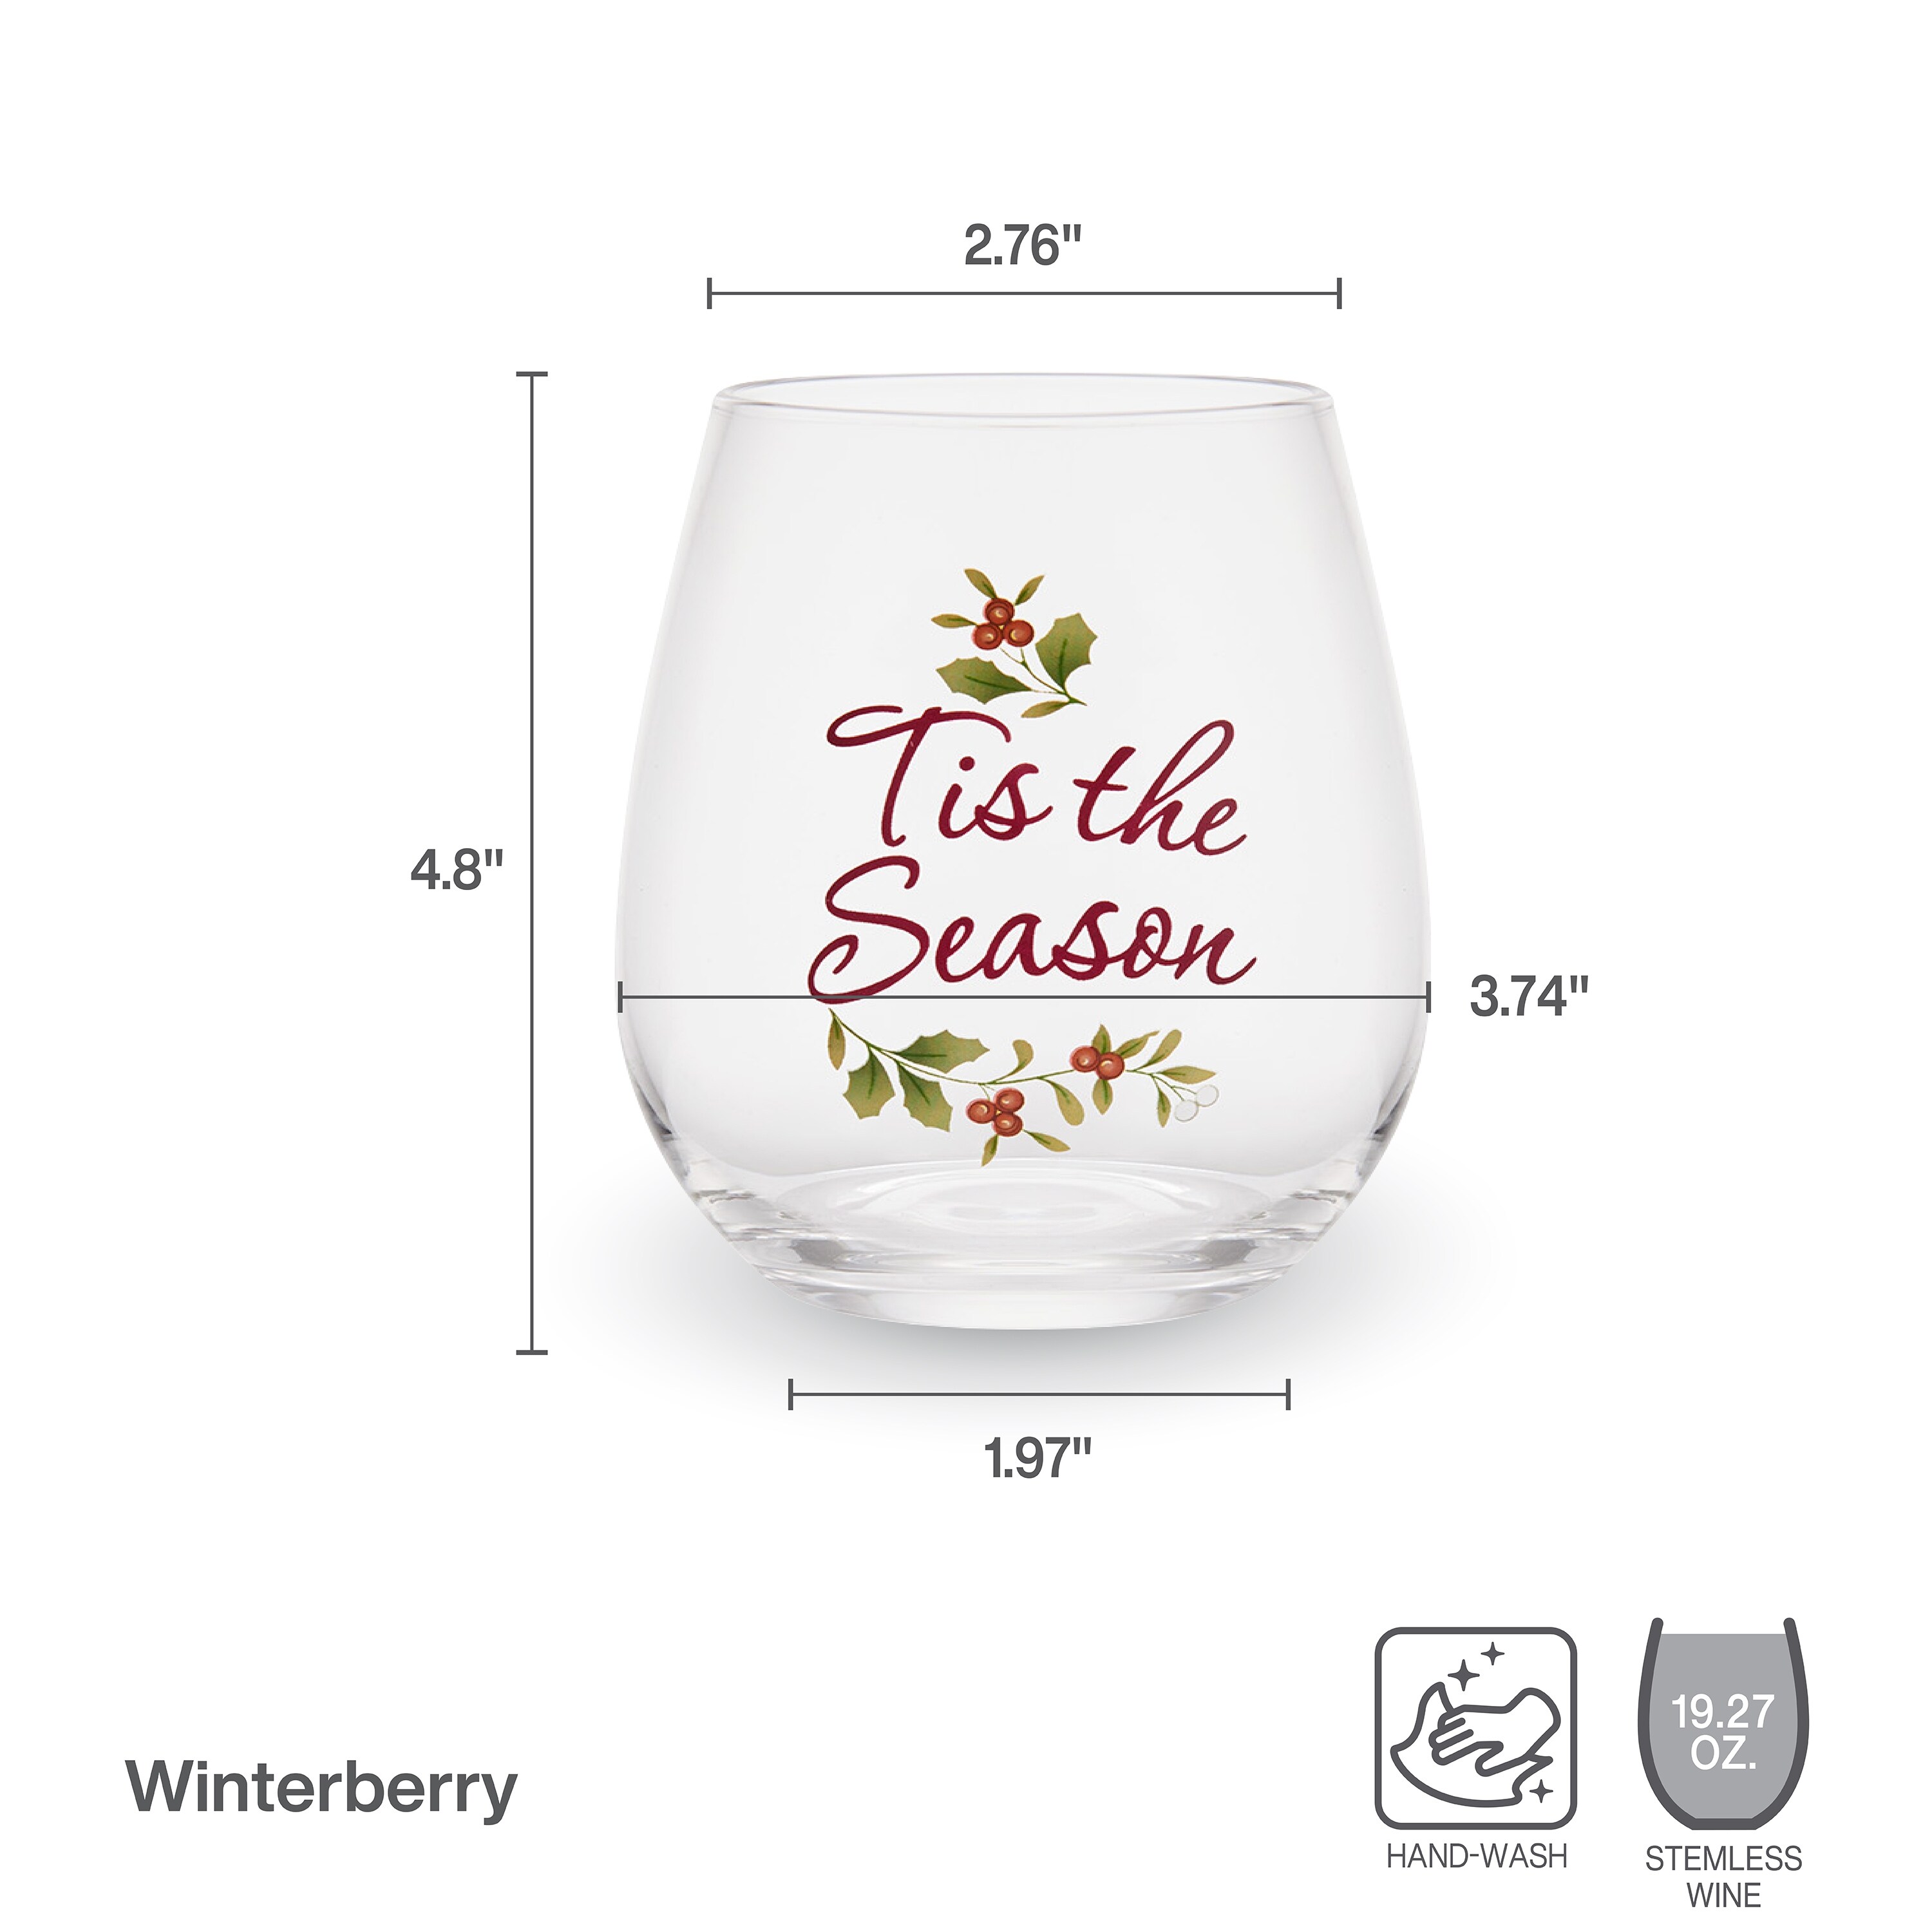 https://ak1.ostkcdn.com/images/products/is/images/direct/1e26f4eee7e23e8f5670f6fa8d621b6bd30a0b53/Pfaltzgraff-Winterberry-19OZ-Stemless-Wine-with-Sentiments%2C-Set-of-4.jpg